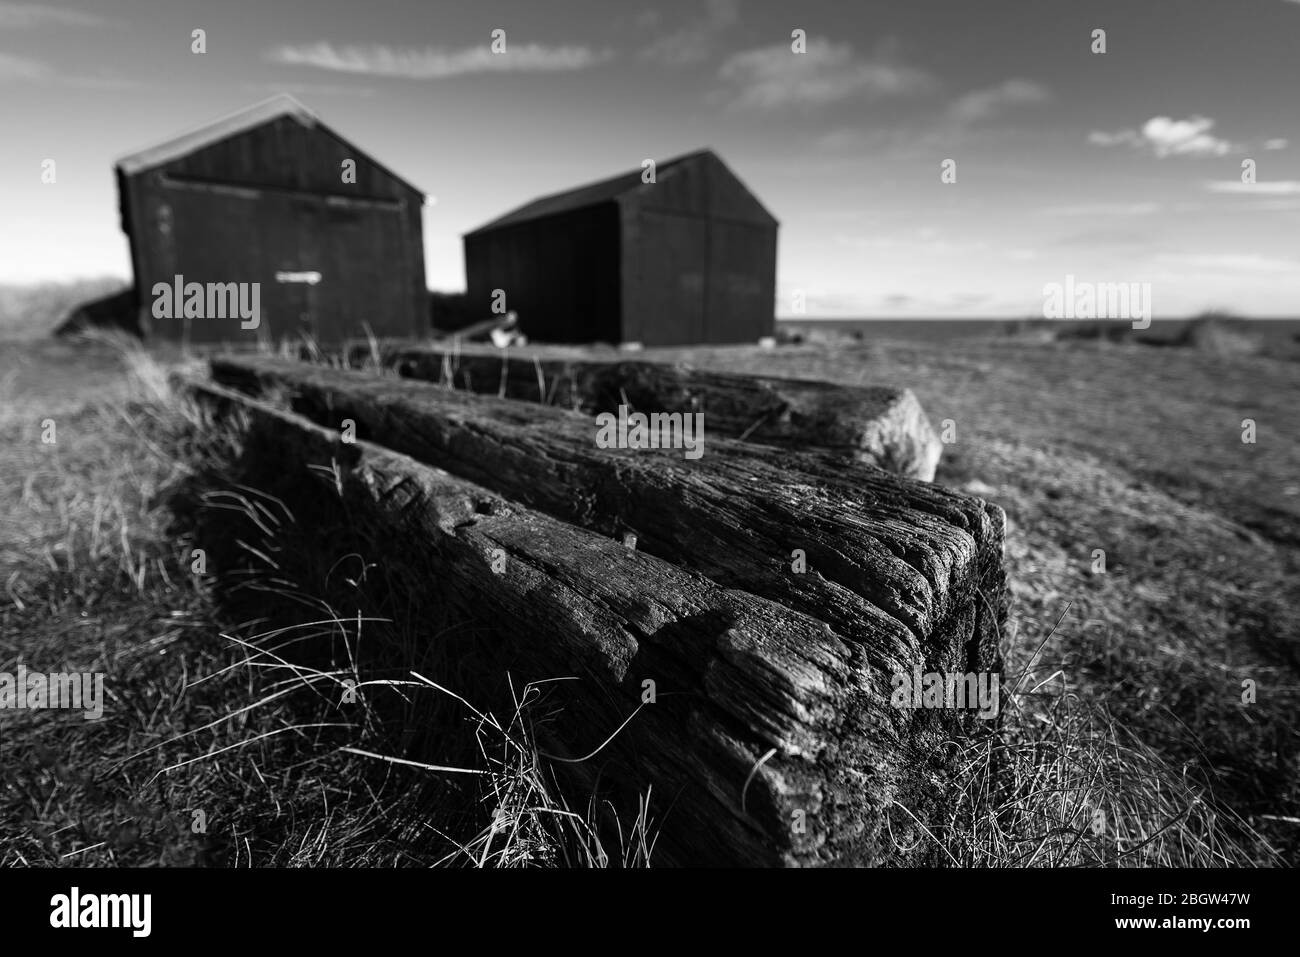 Fishermans huts with old timbers foreground ii. Mono- Winterton, November 2016 Stock Photo